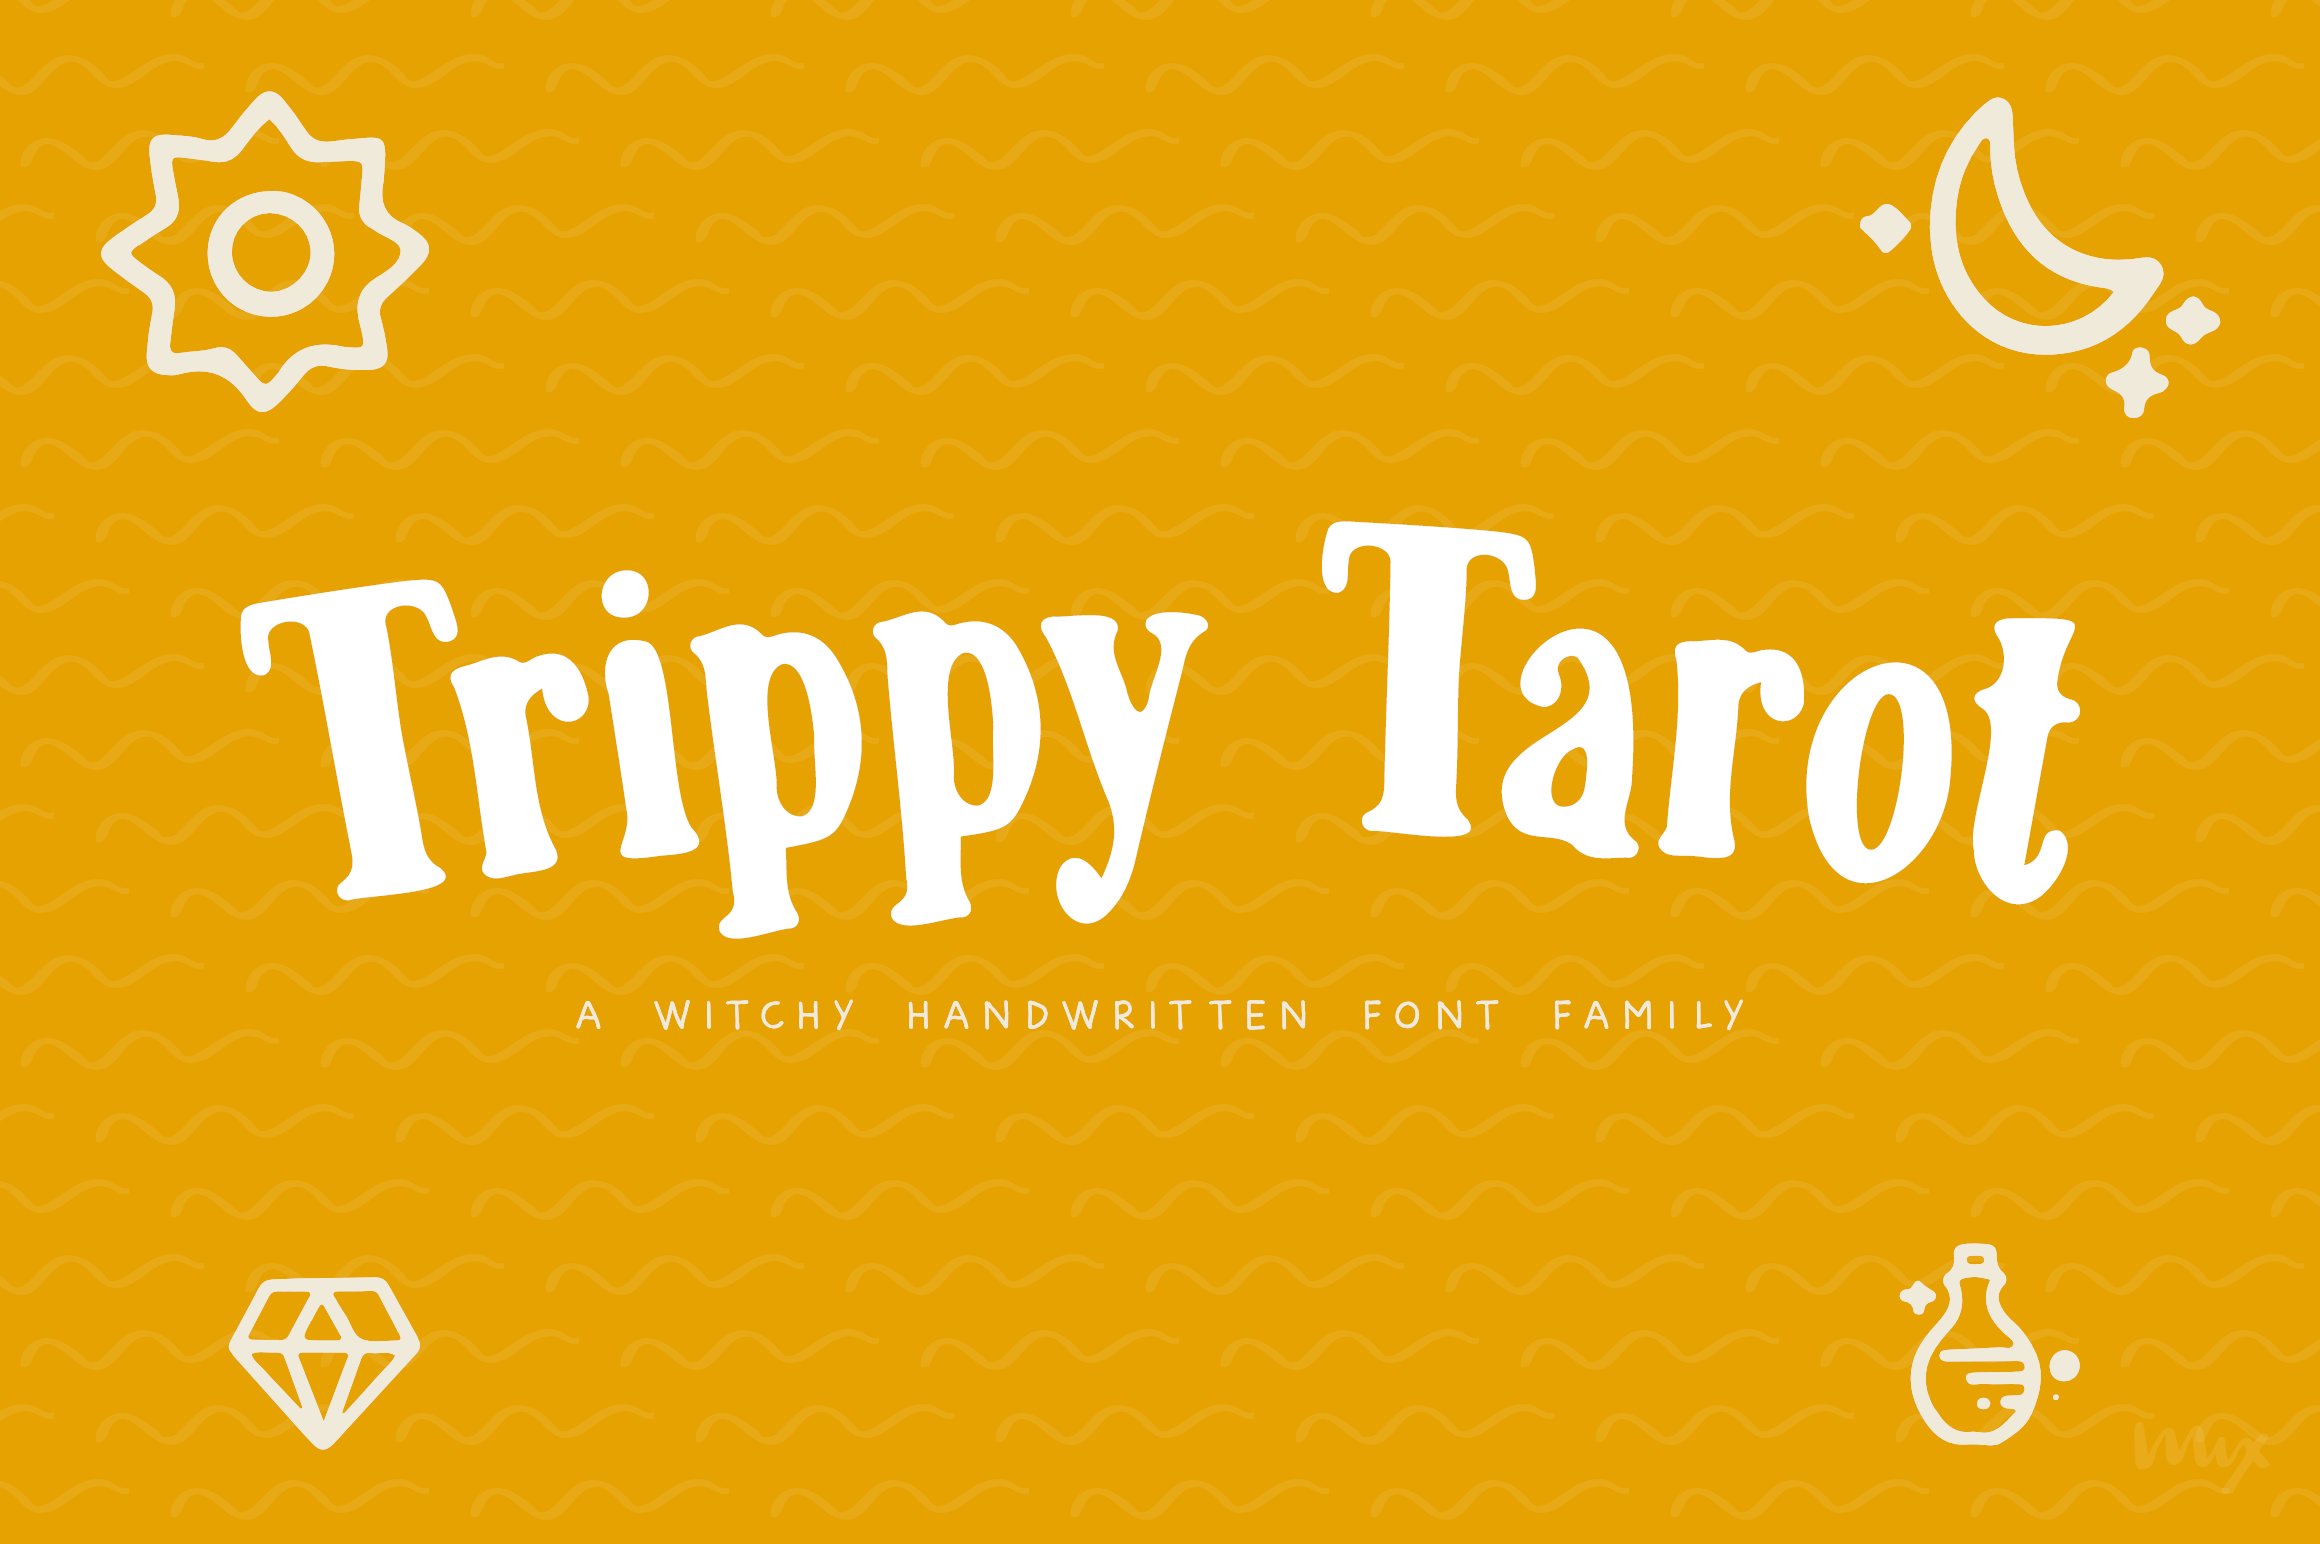 Trippy Tarot (3-Piece Font Family) cover image.